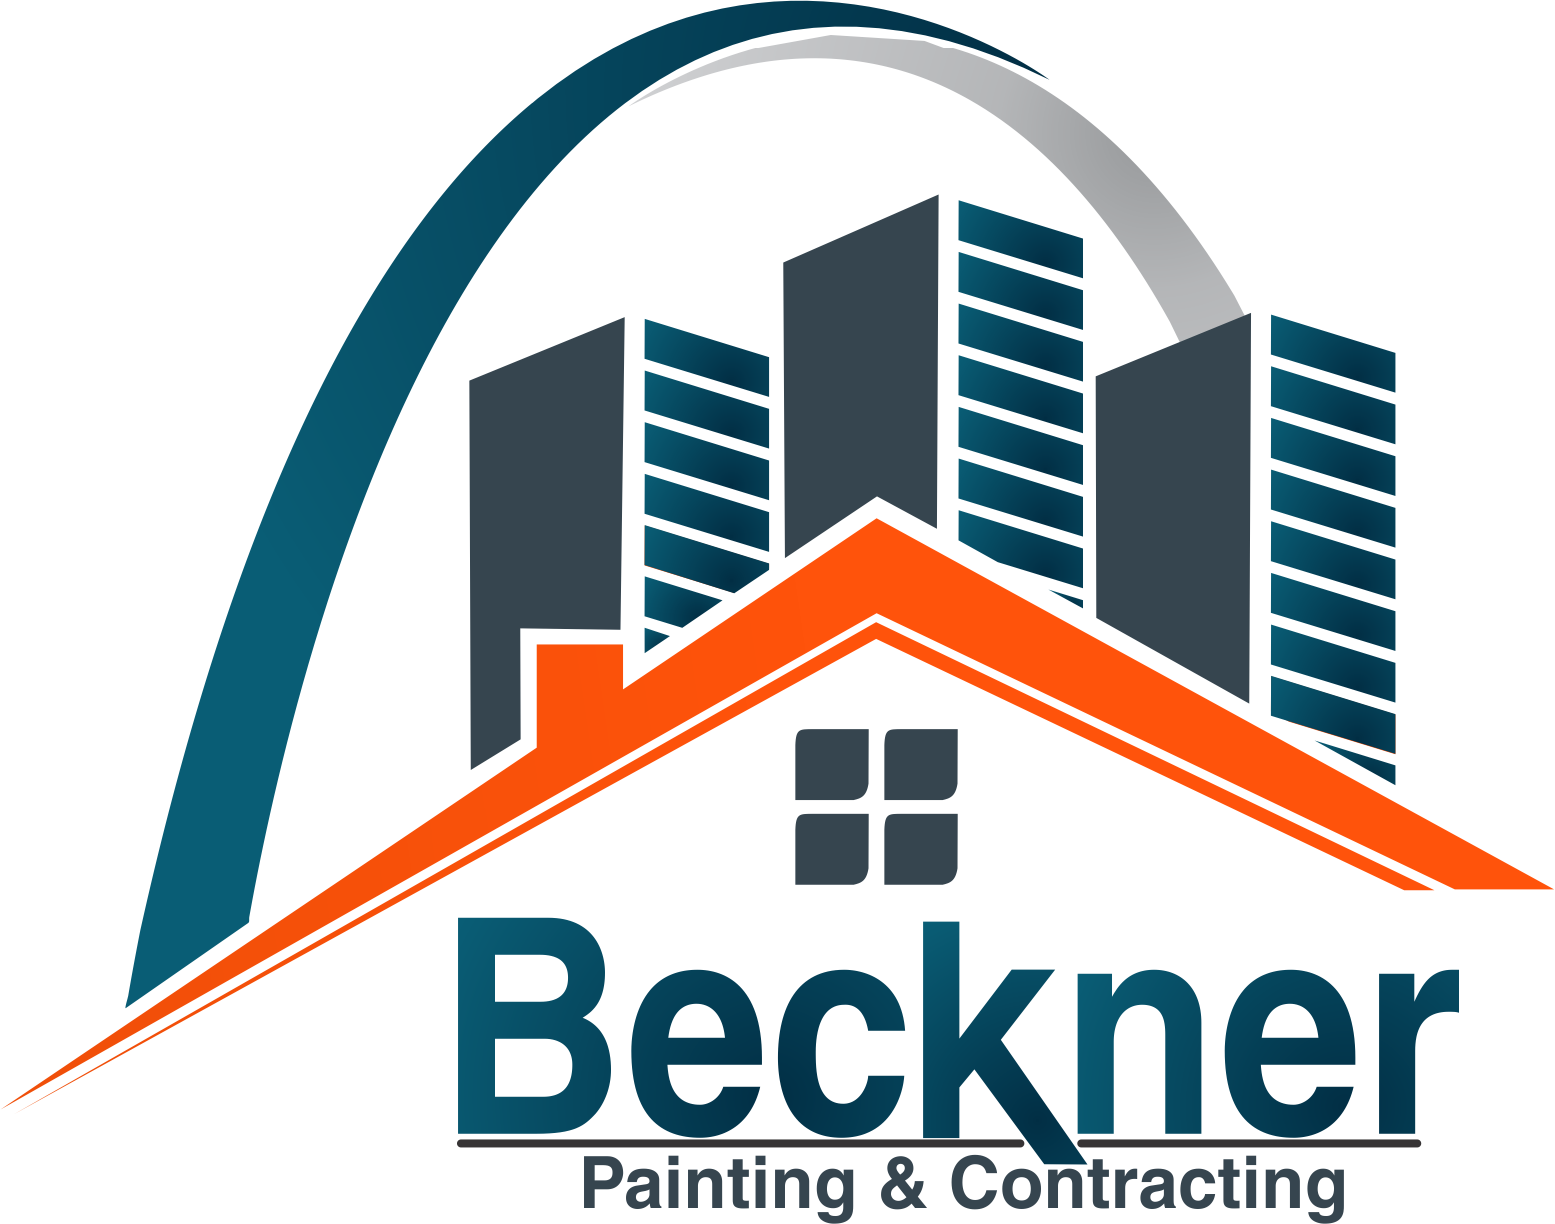 Beckner Painting & Contracting Company Logo